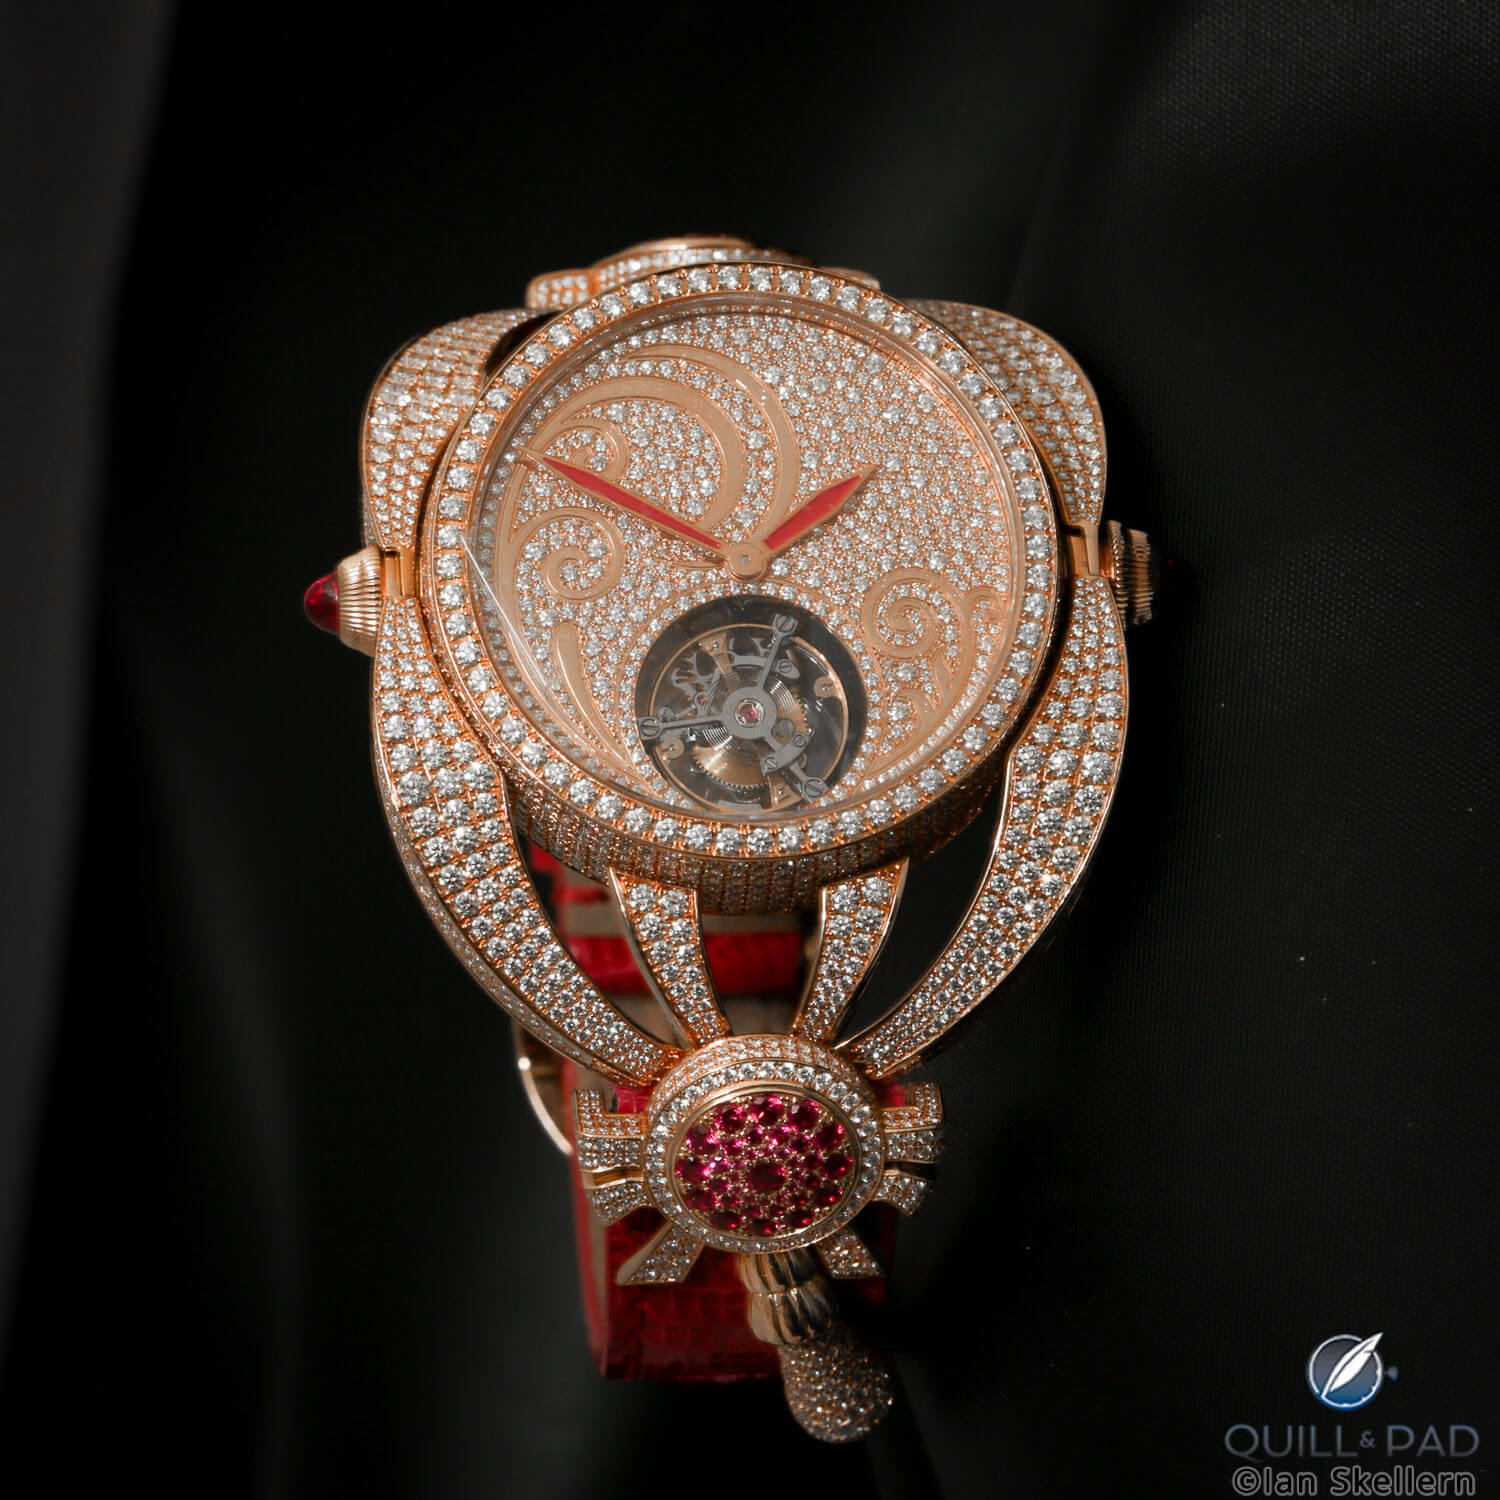 Giberg Niura Flying Tourbillon in red gold set with diamonds and rubies